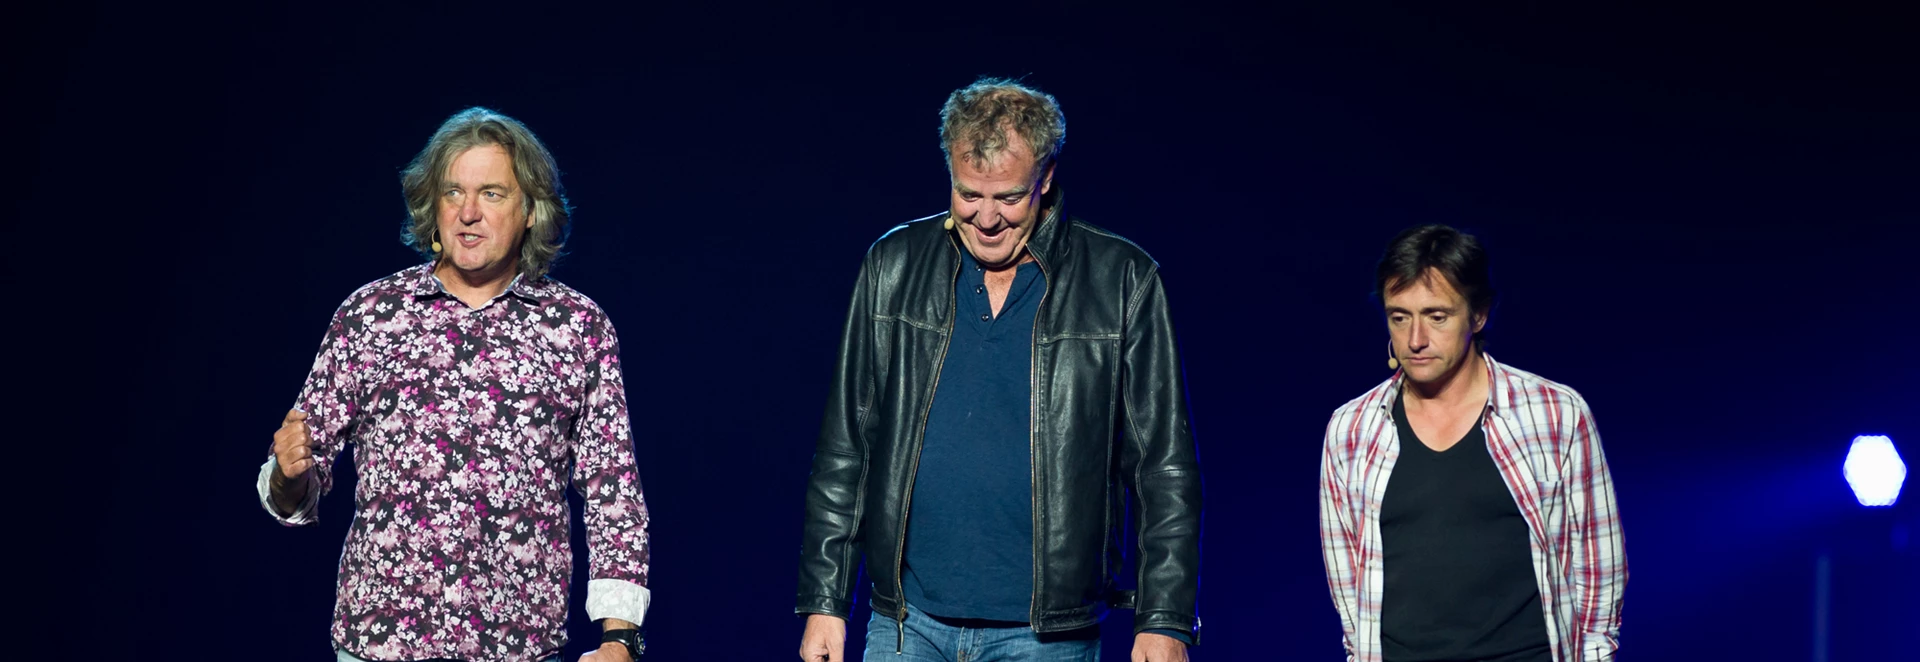 Top Gear Christmas special cancelled 